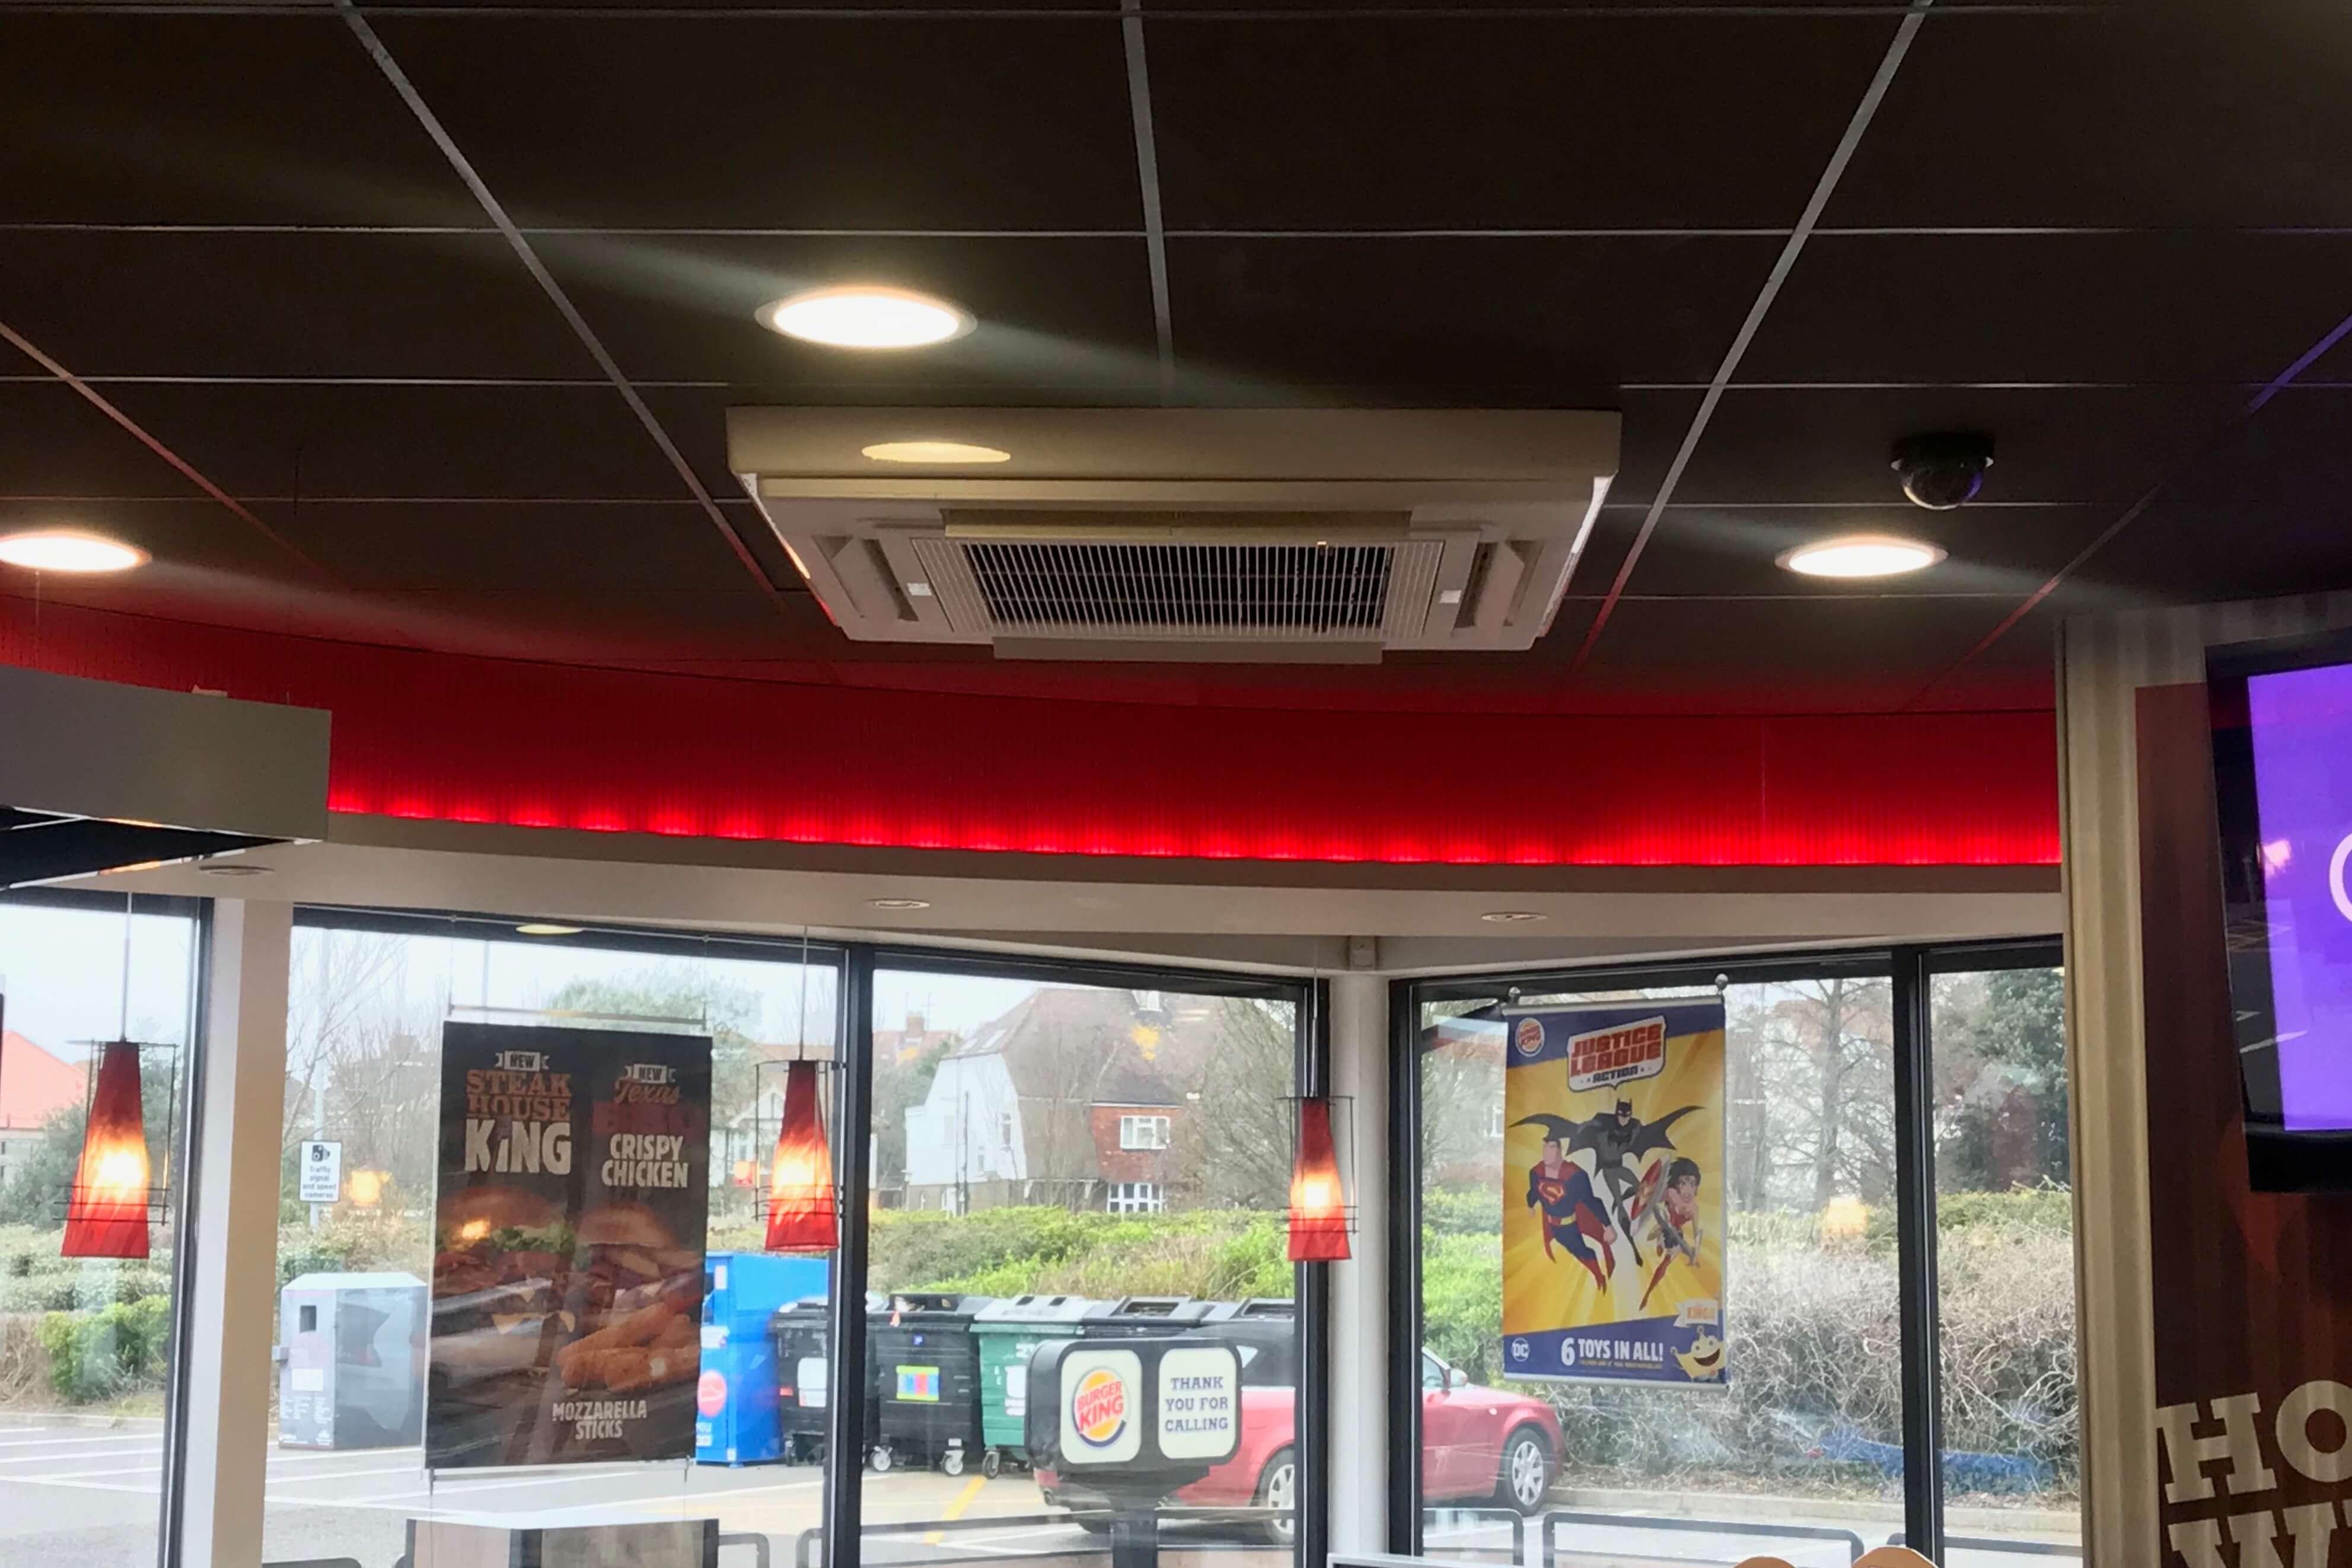 A ceiling air conditioning unit installed in a Burger King restaurant